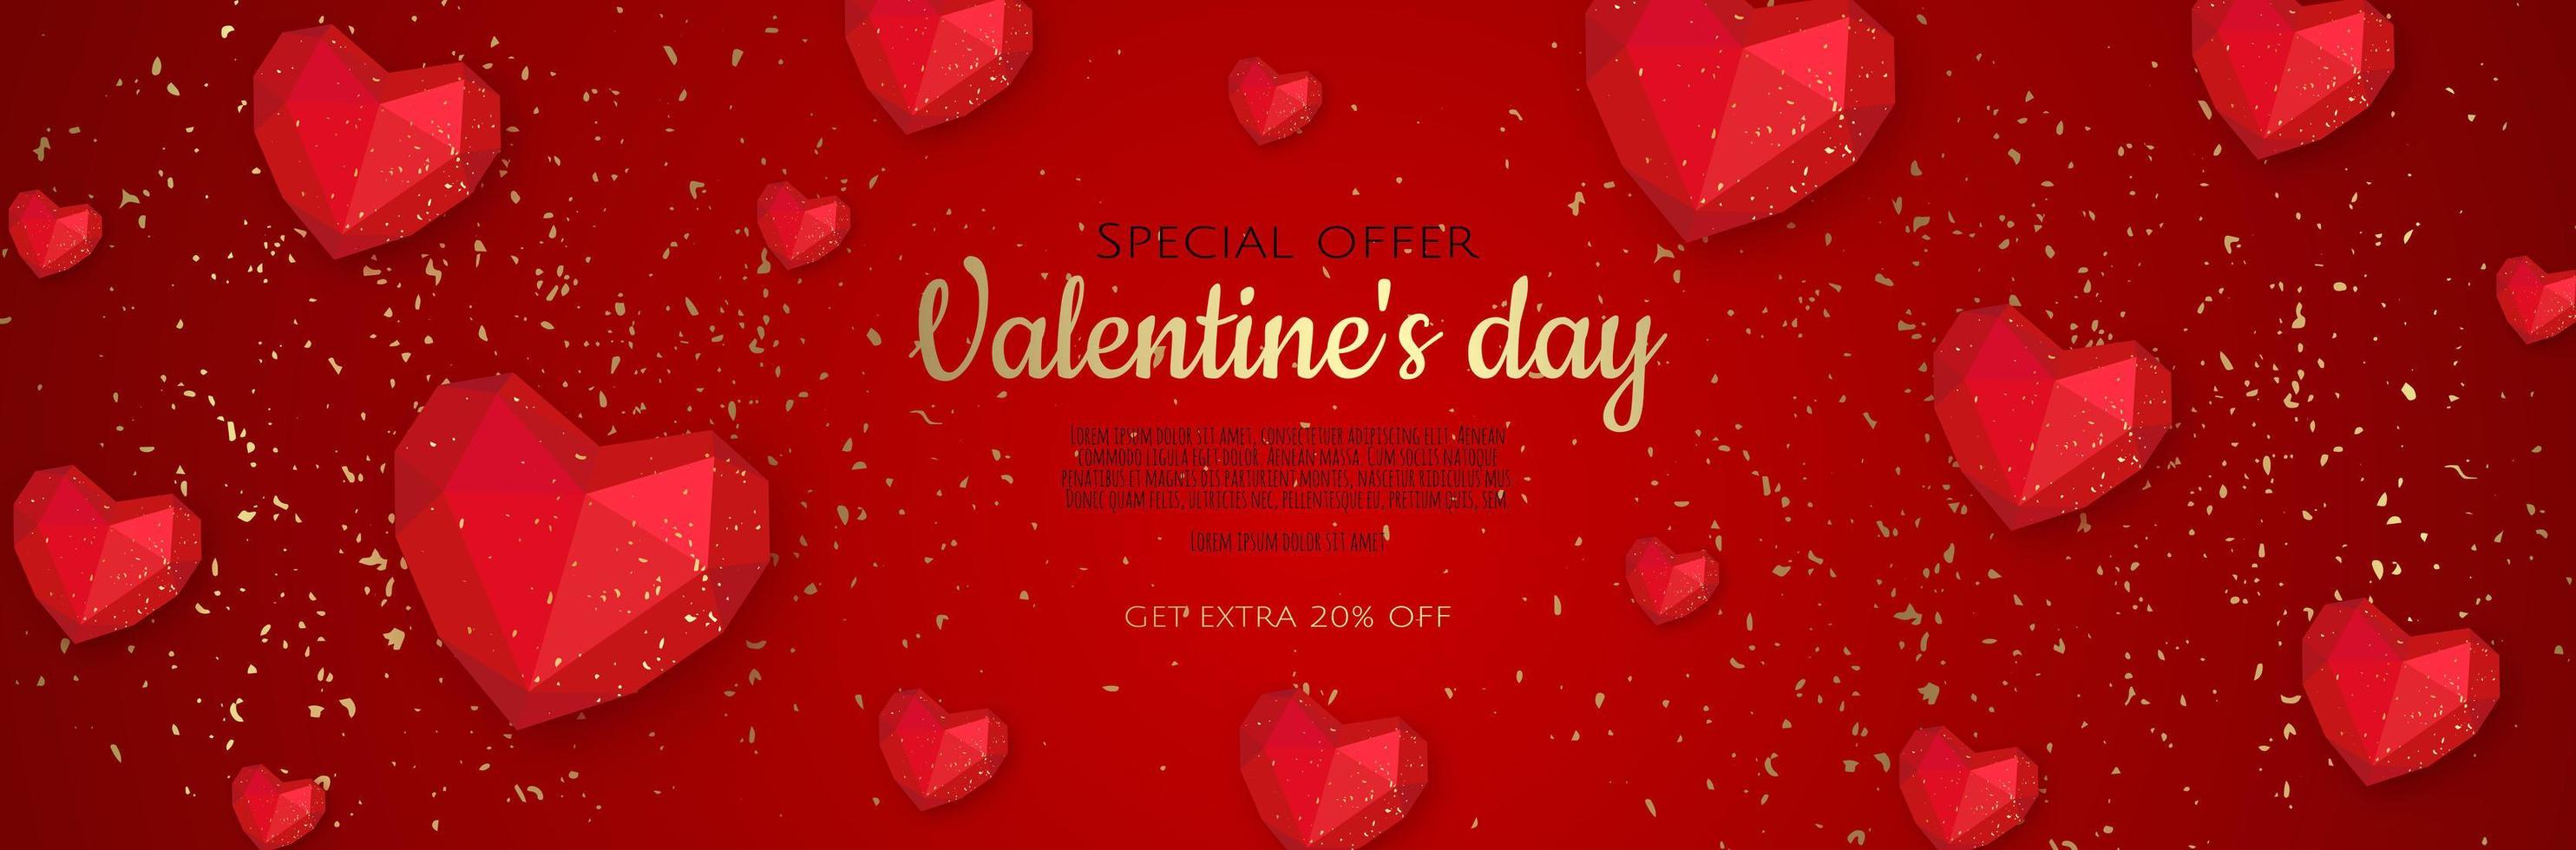 Happy Valentine s Day Romantic creative banner, horizontal header for website. Background Realistic 3d heart. vector